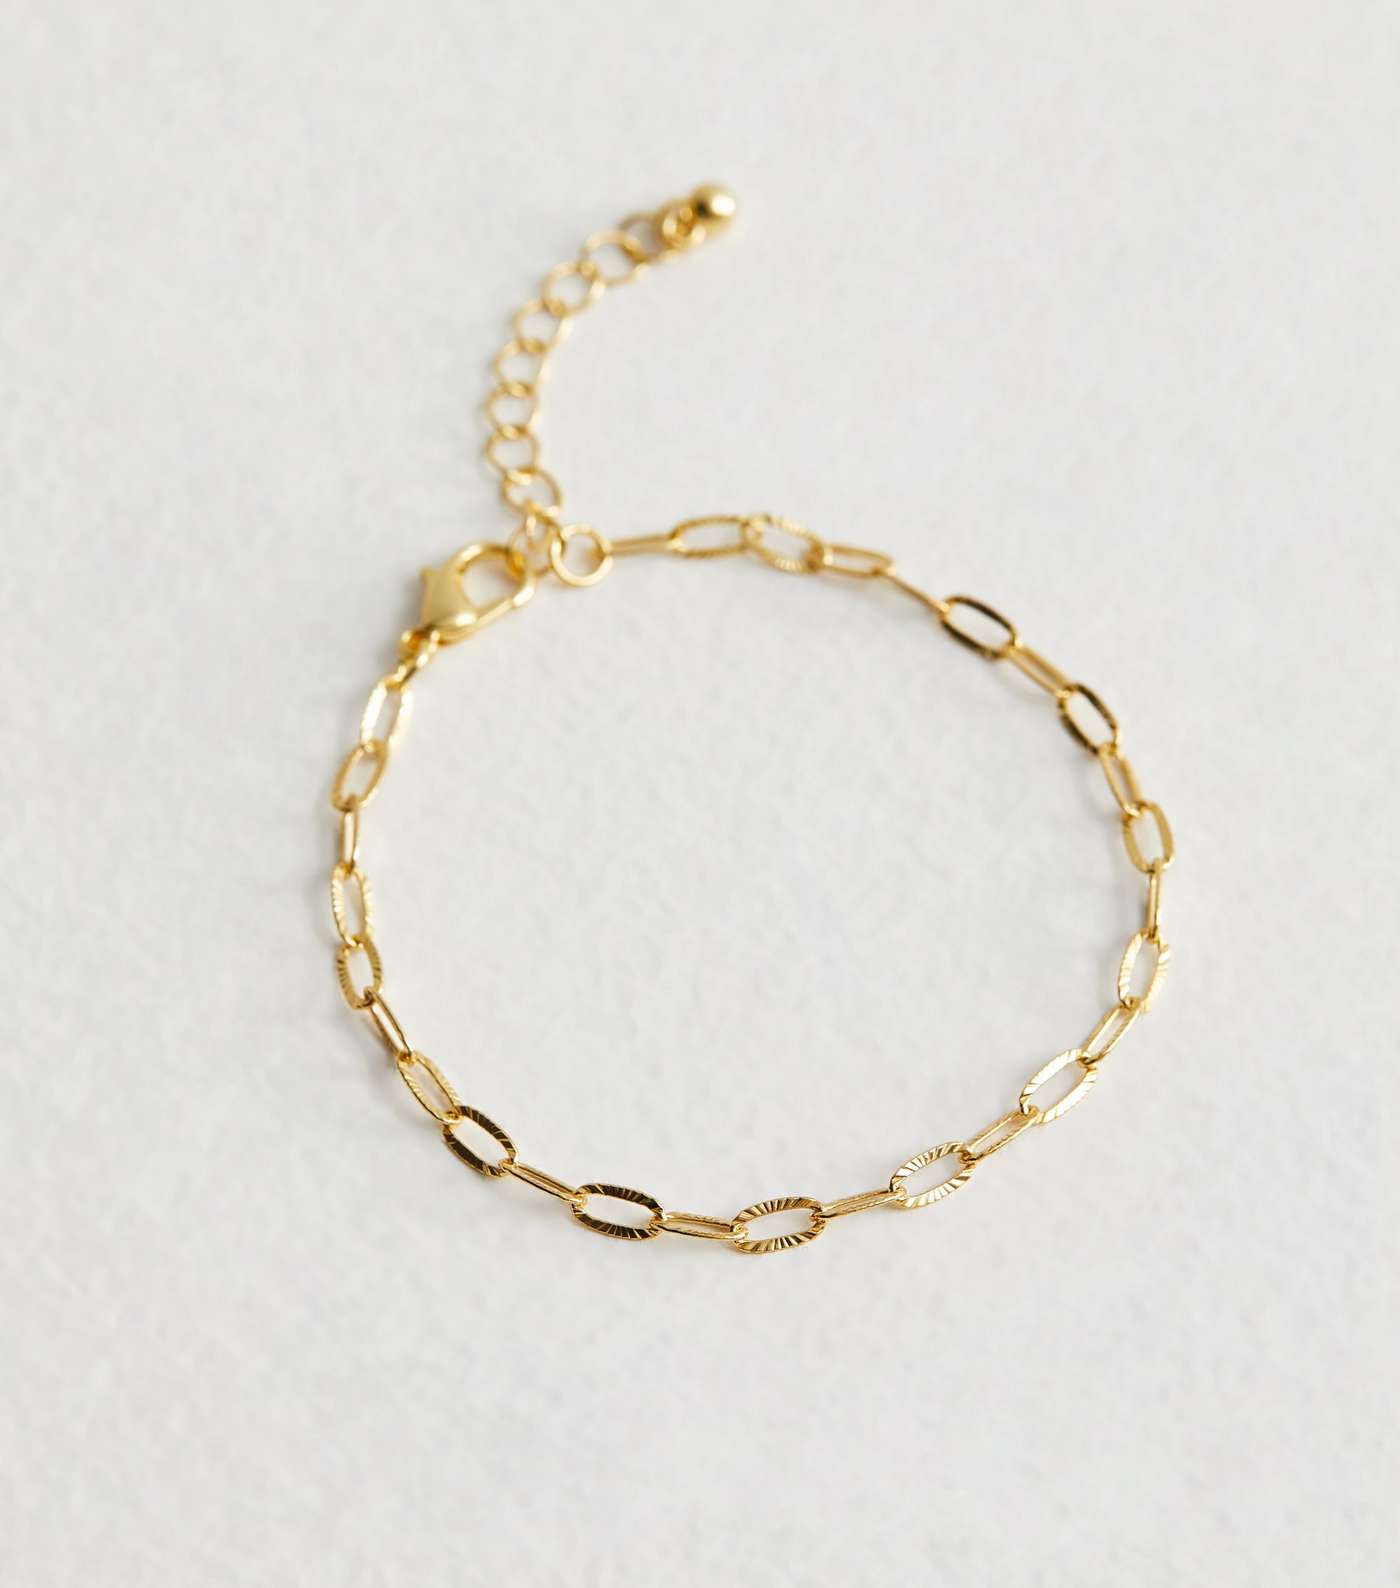 Real Gold Plate Textured Chain Bracelet Image 4